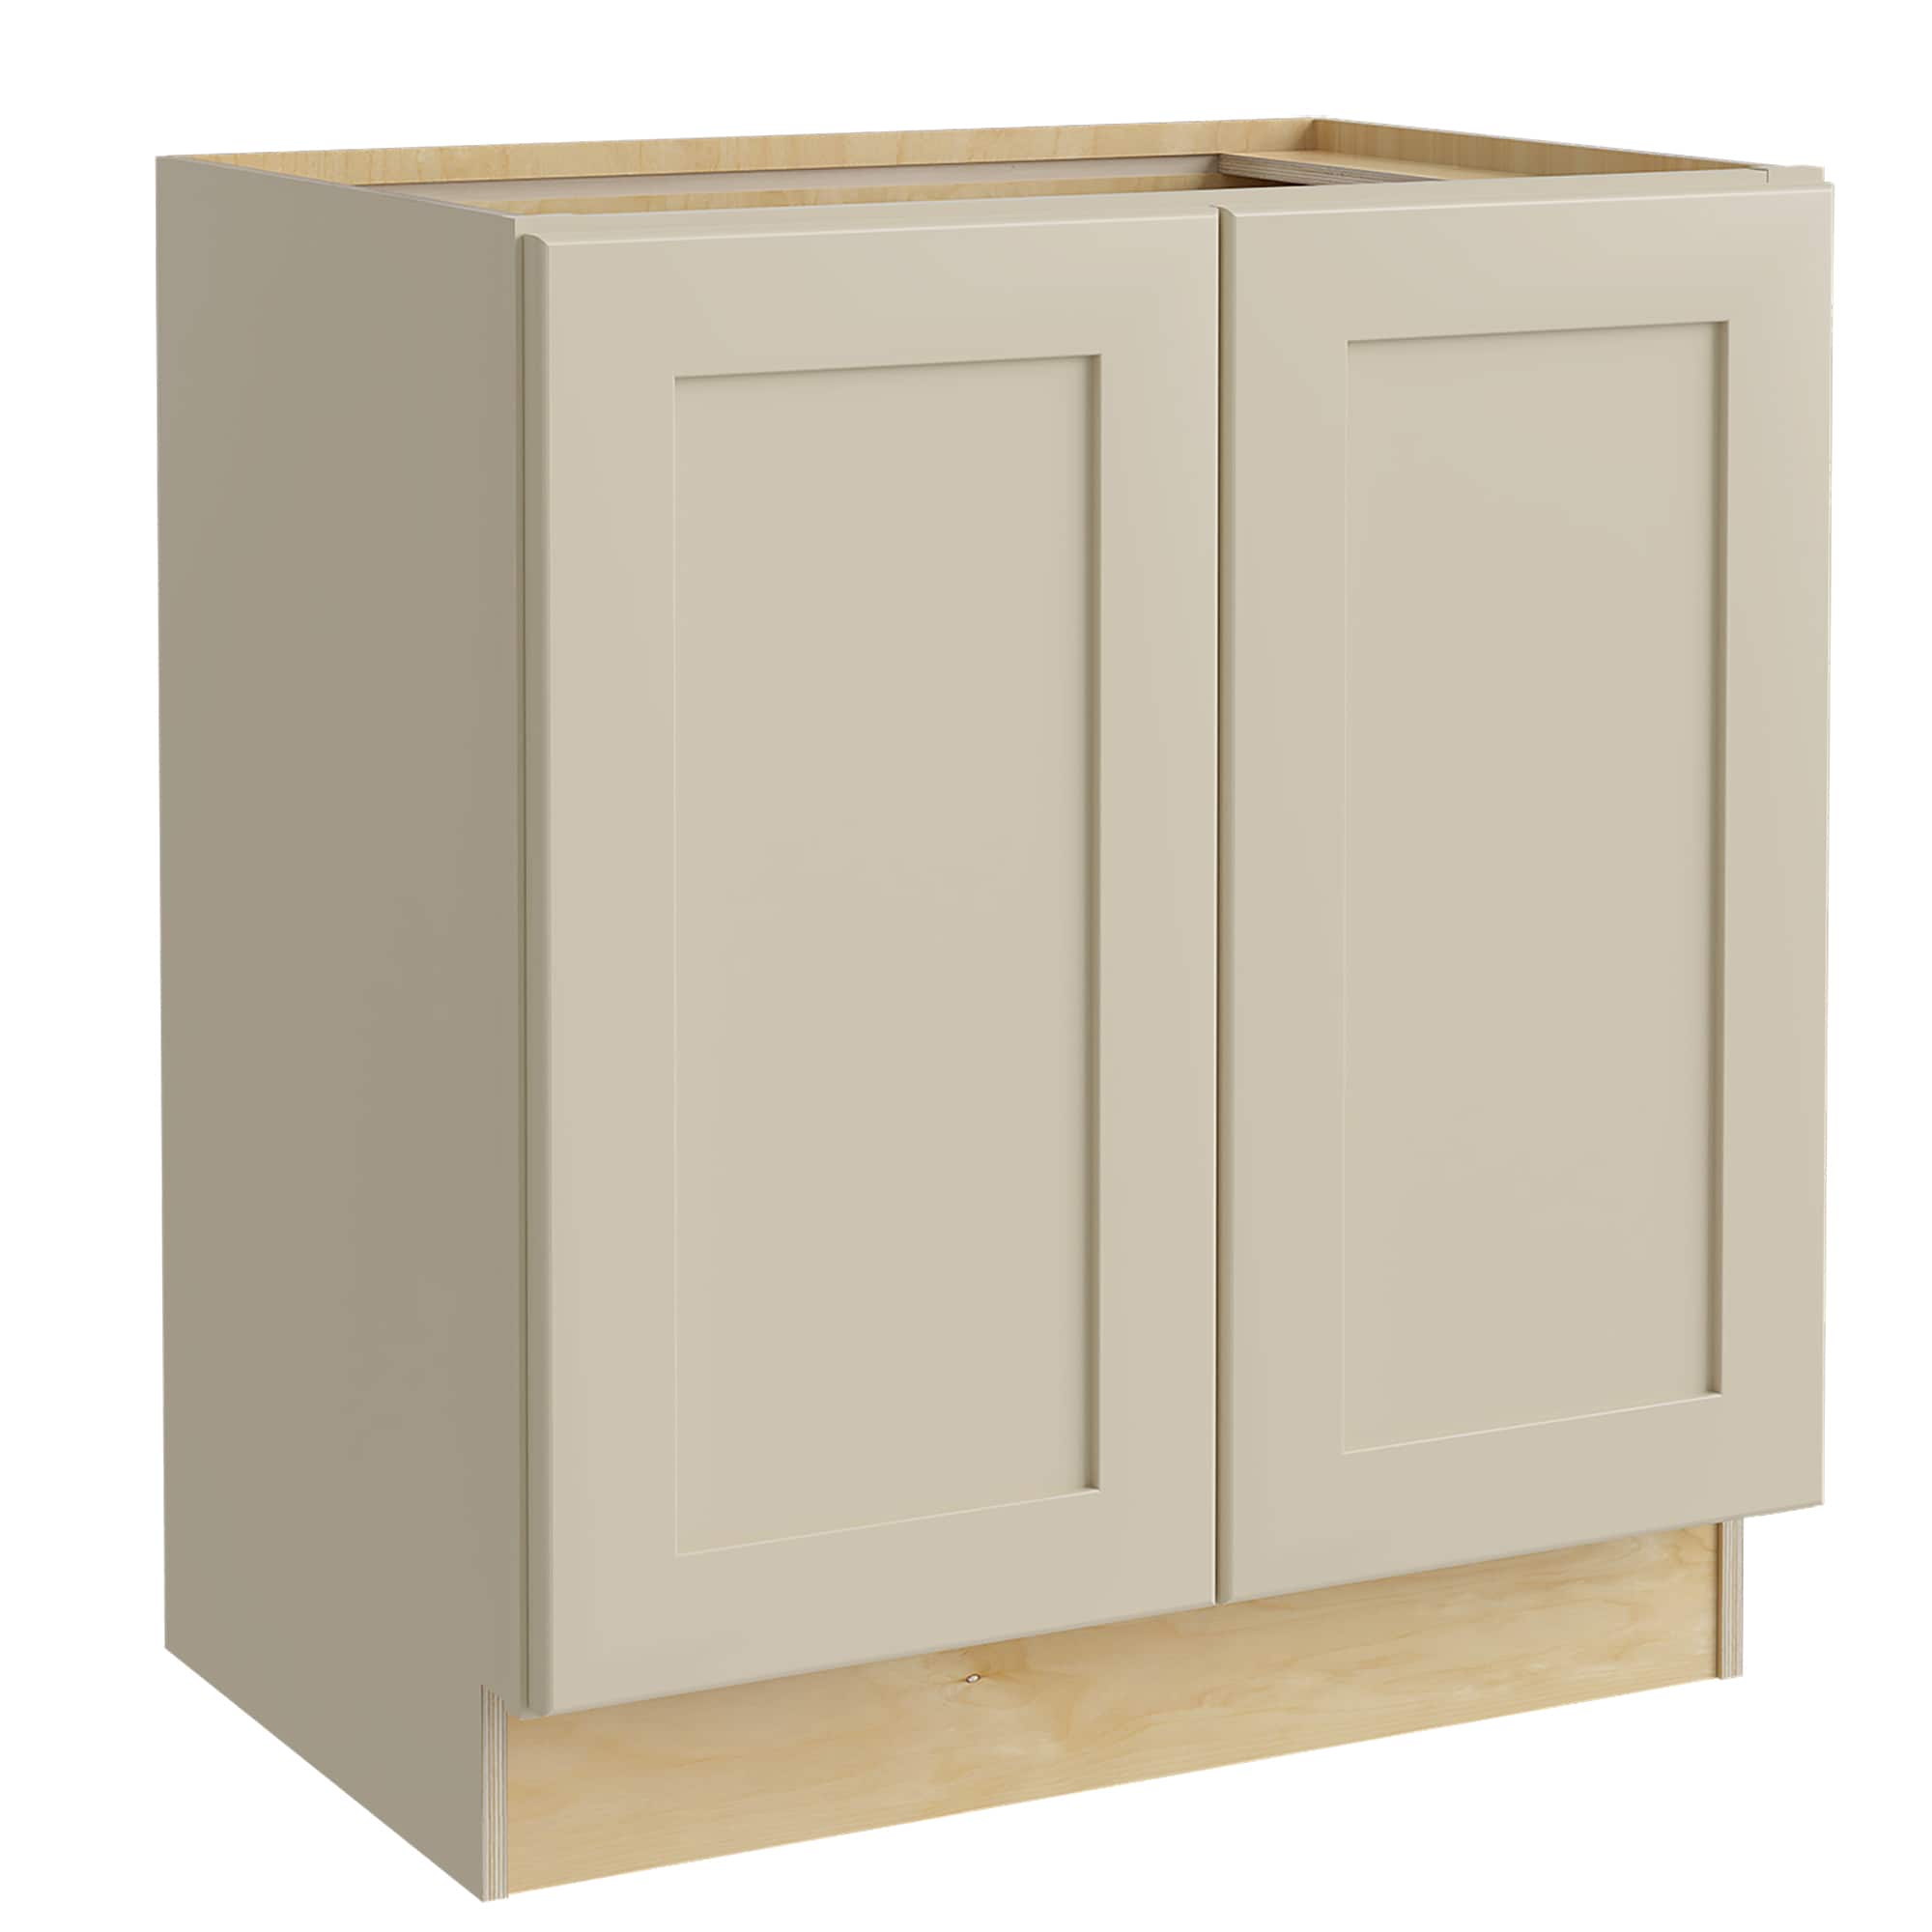 Luxxe Cabinetry 33-in W x 34.5-in H x 21-in D Norfolk Blended Cream Painted Door Base Fully Assembled Semi-custom Cabinet in Off-White | VB3321FH-NBC